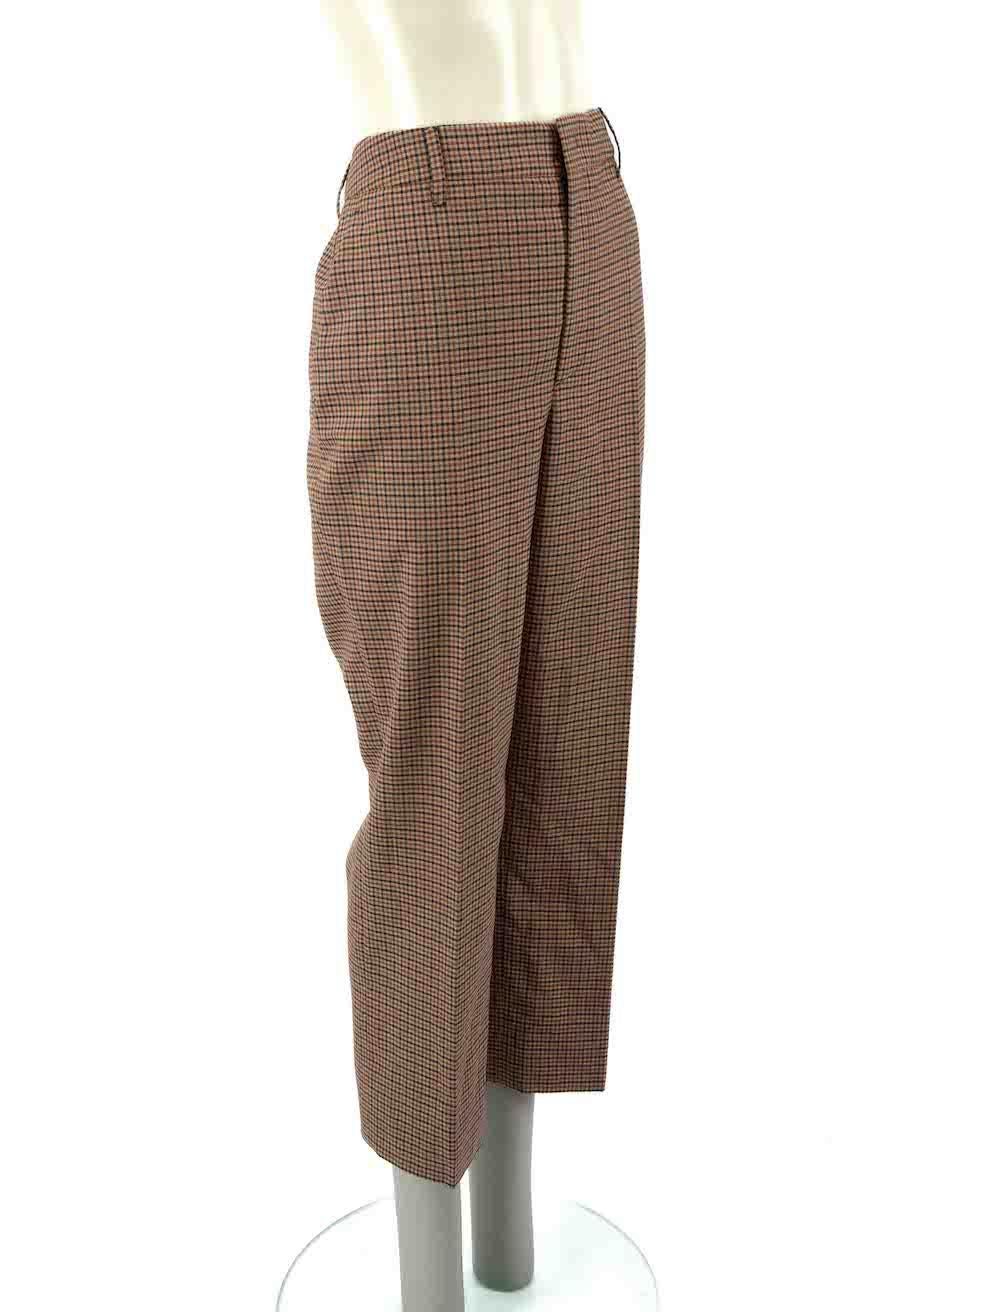 CONDITION is Very good. Hardly any visible wear to trousers is evident on this used Prada designer resale item.
 
Details
Brown
Wool
Straight leg trousers
Checkered pattern
High rise
Belt hoops
Front zip closure with clasp and button
2x Front side